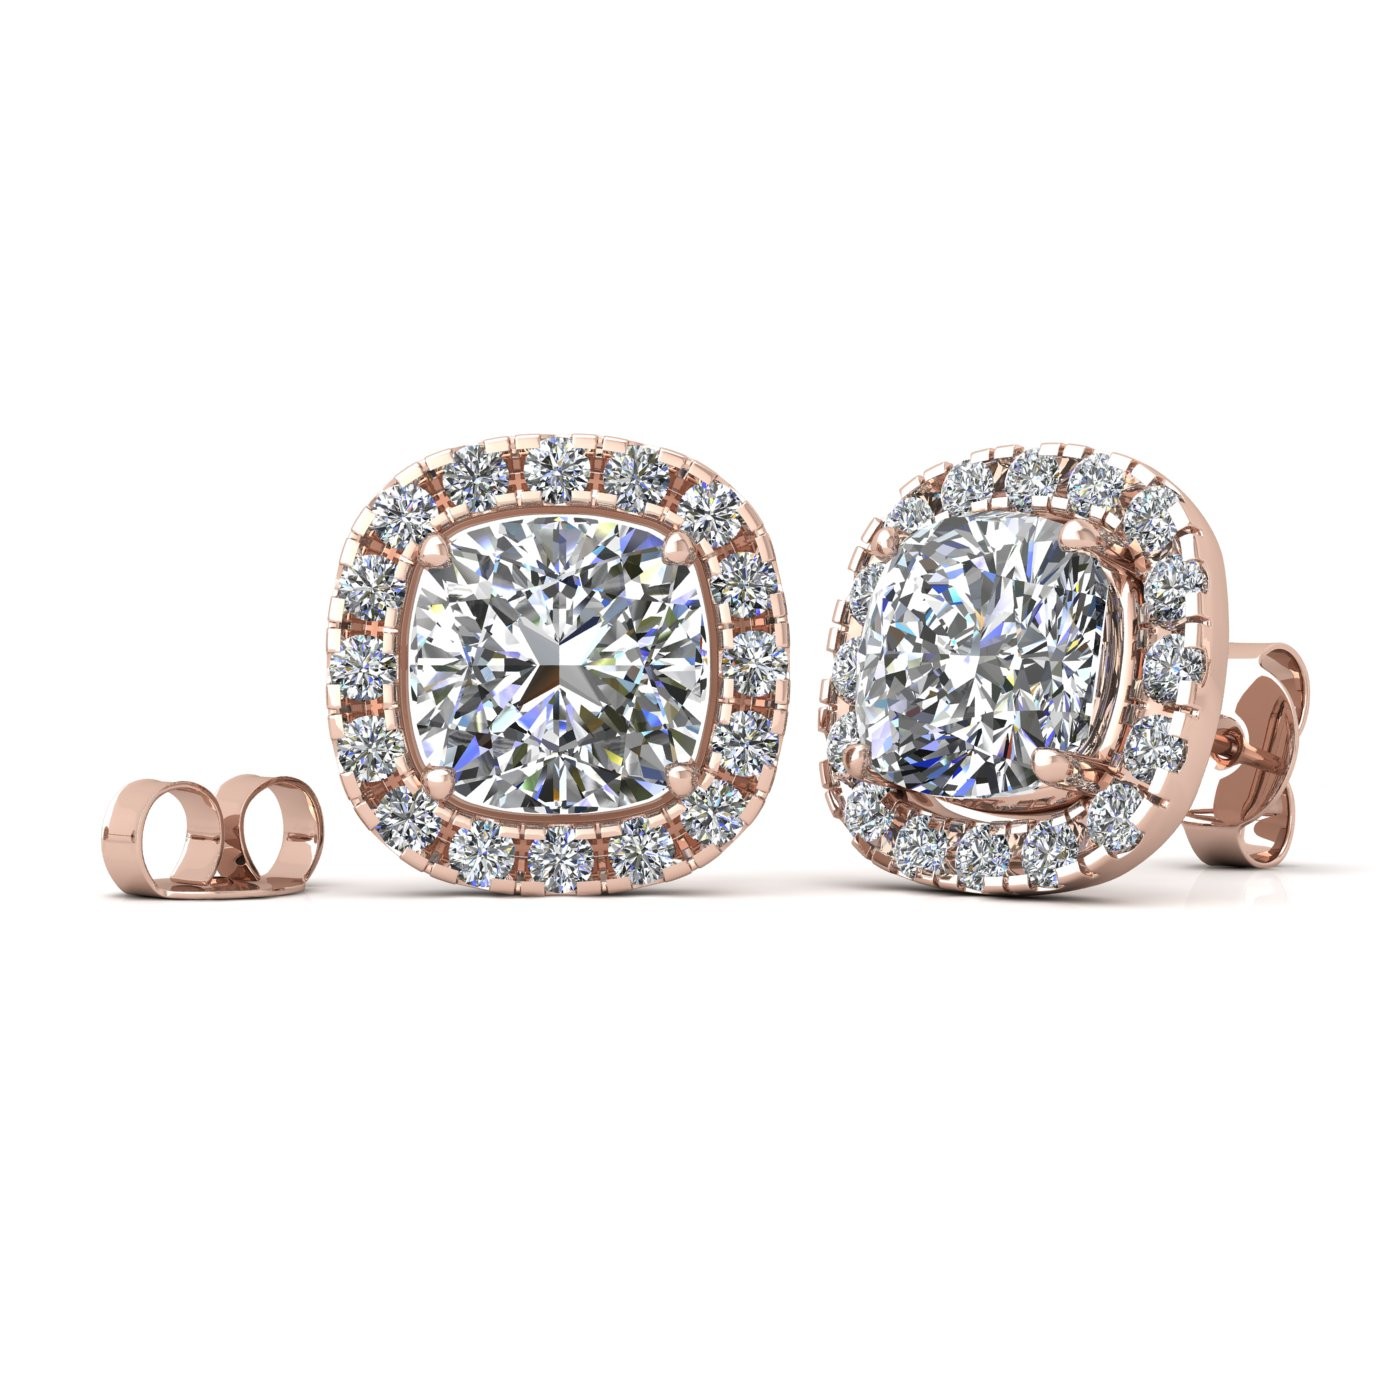 18k rose gold 1.2 ct each (2,4 tcw) 4 prongs cushion cut halo diamond earring studs Photos & images